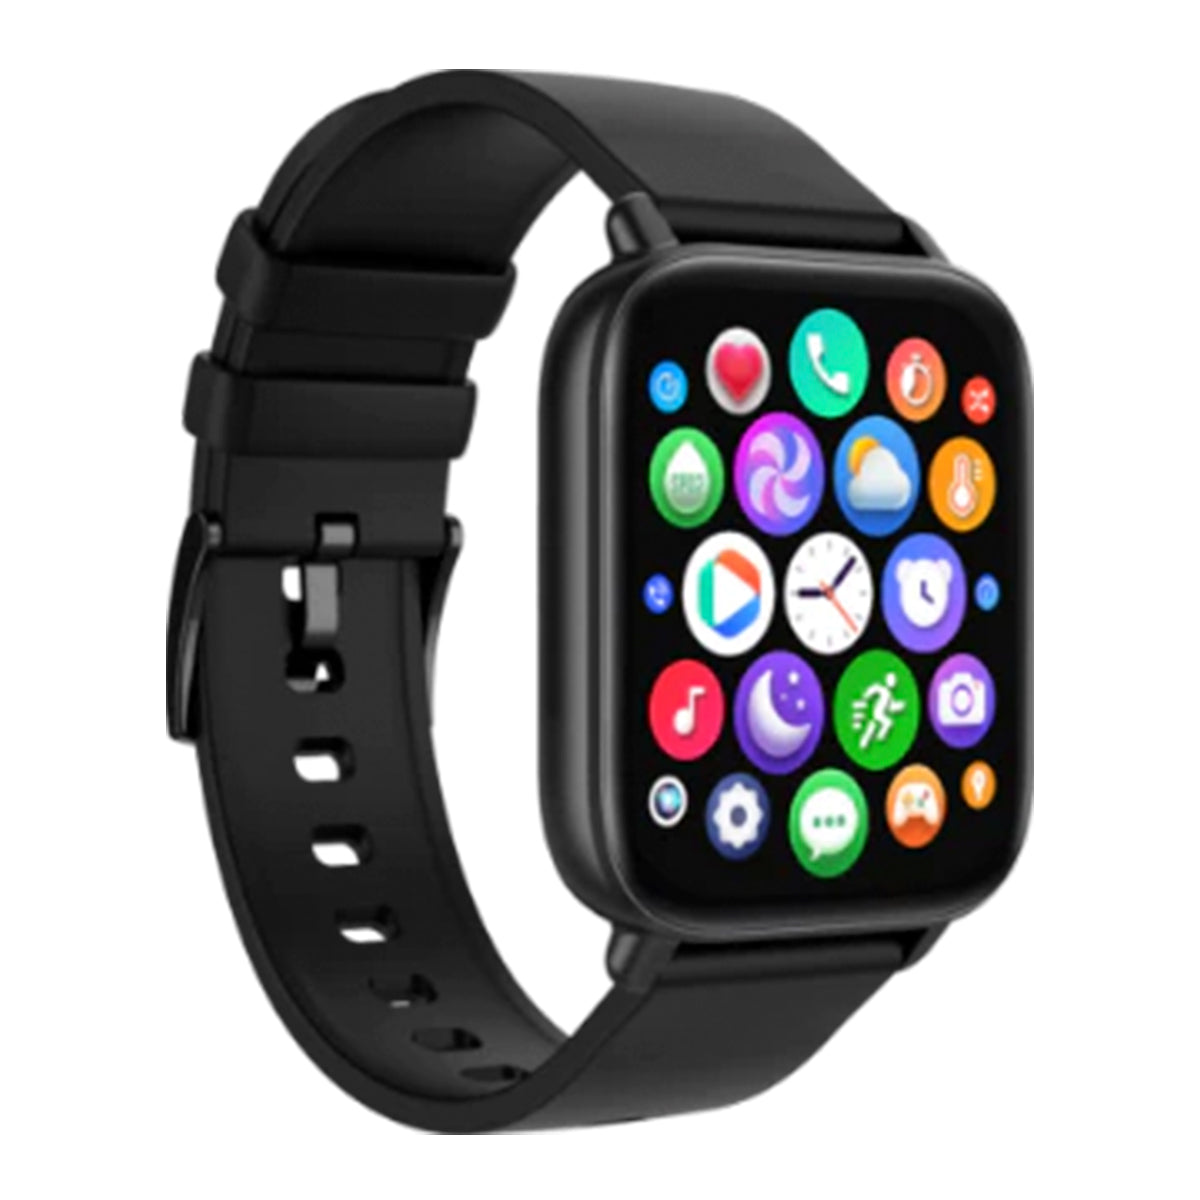 Yolo Watch Pro Charcoal Black Smart Watch With Bluetooth Calling